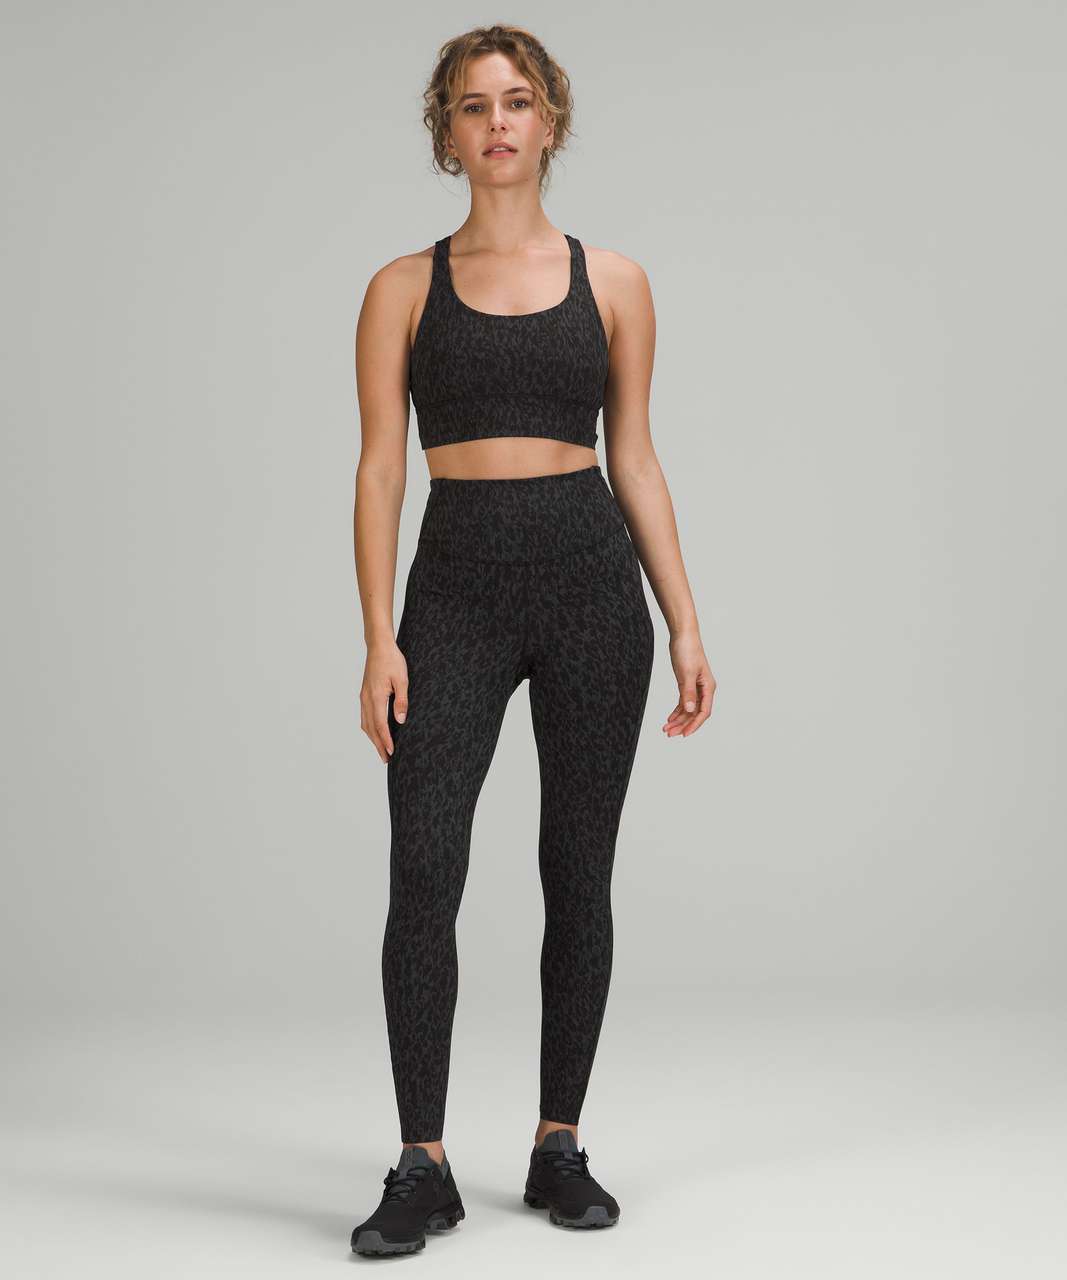 Lululemon Base Pace High-Rise Running Tight 28 - Leopard Camo